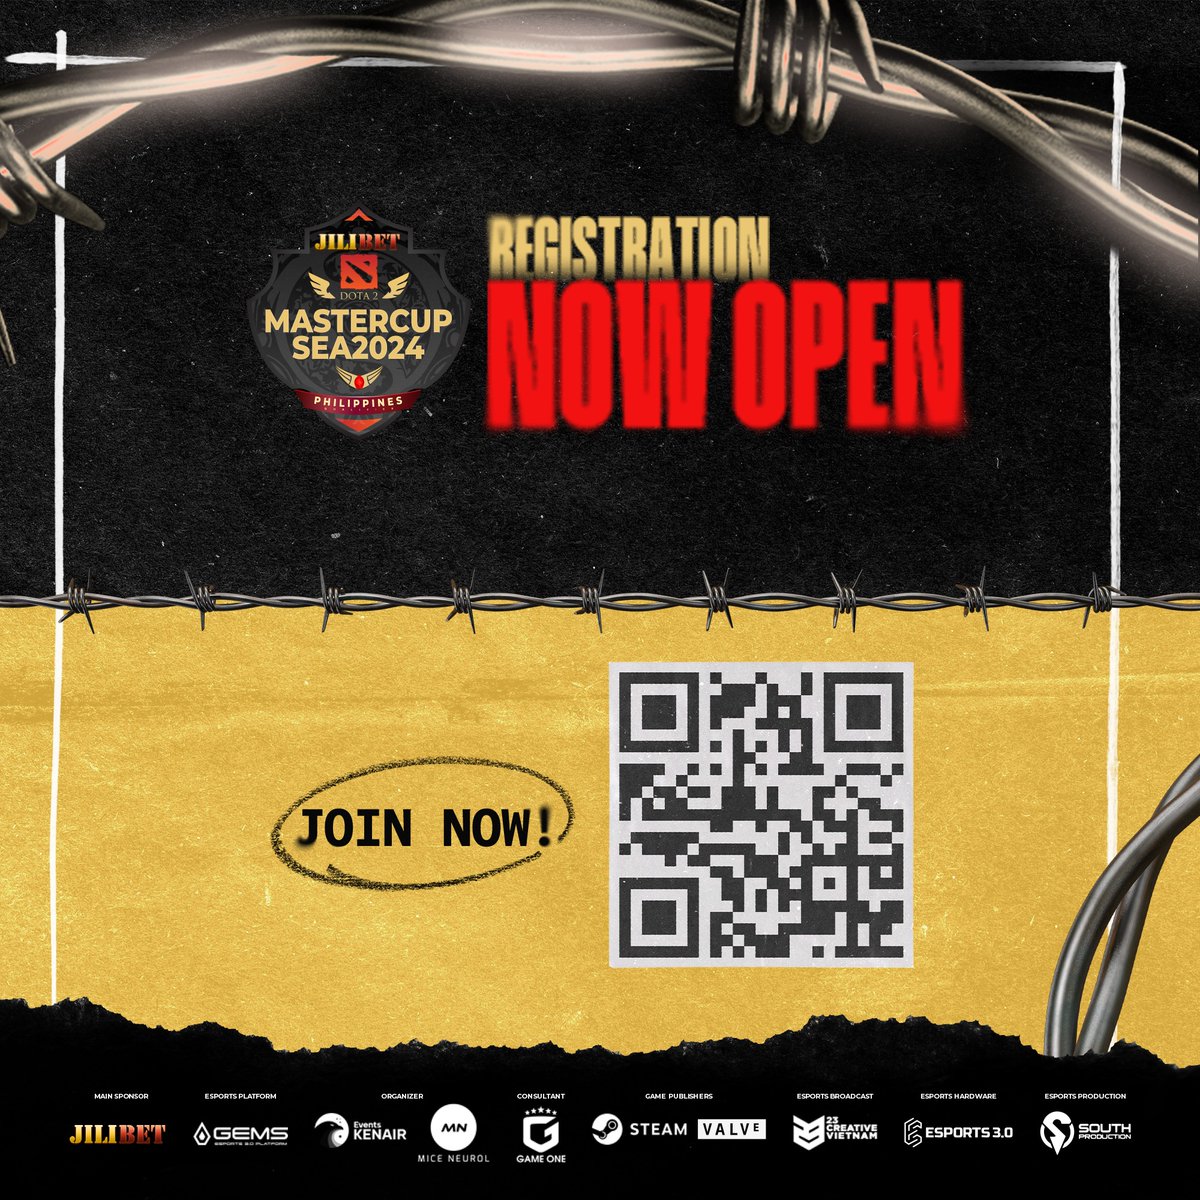 🔥 Join the action! Registration for DOTA 2 MASTERCUP SEA 2024: PHILIPPINES QUALIFIER is now live! Compete against the best, showcase your skills, and vie for victory! Don't miss out, sign up today! 🎮🏆 #Dota2 #Esports